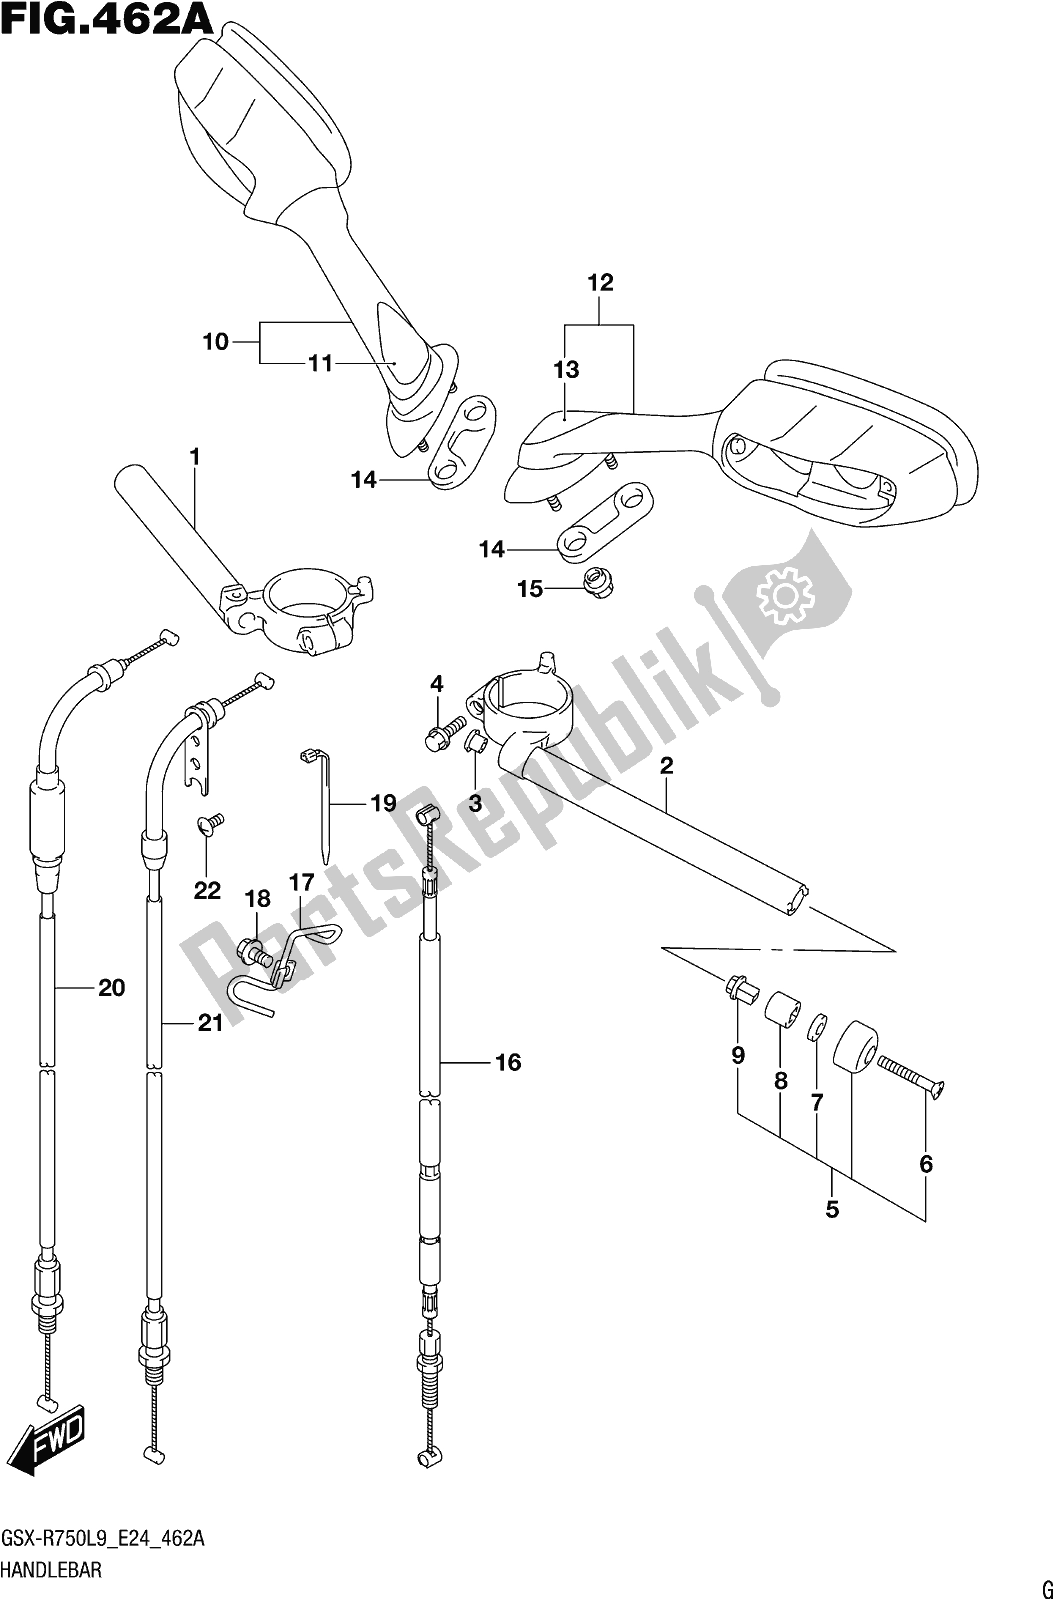 All parts for the Fig. 462a Handlebar of the Suzuki Gsx-r 750 2019